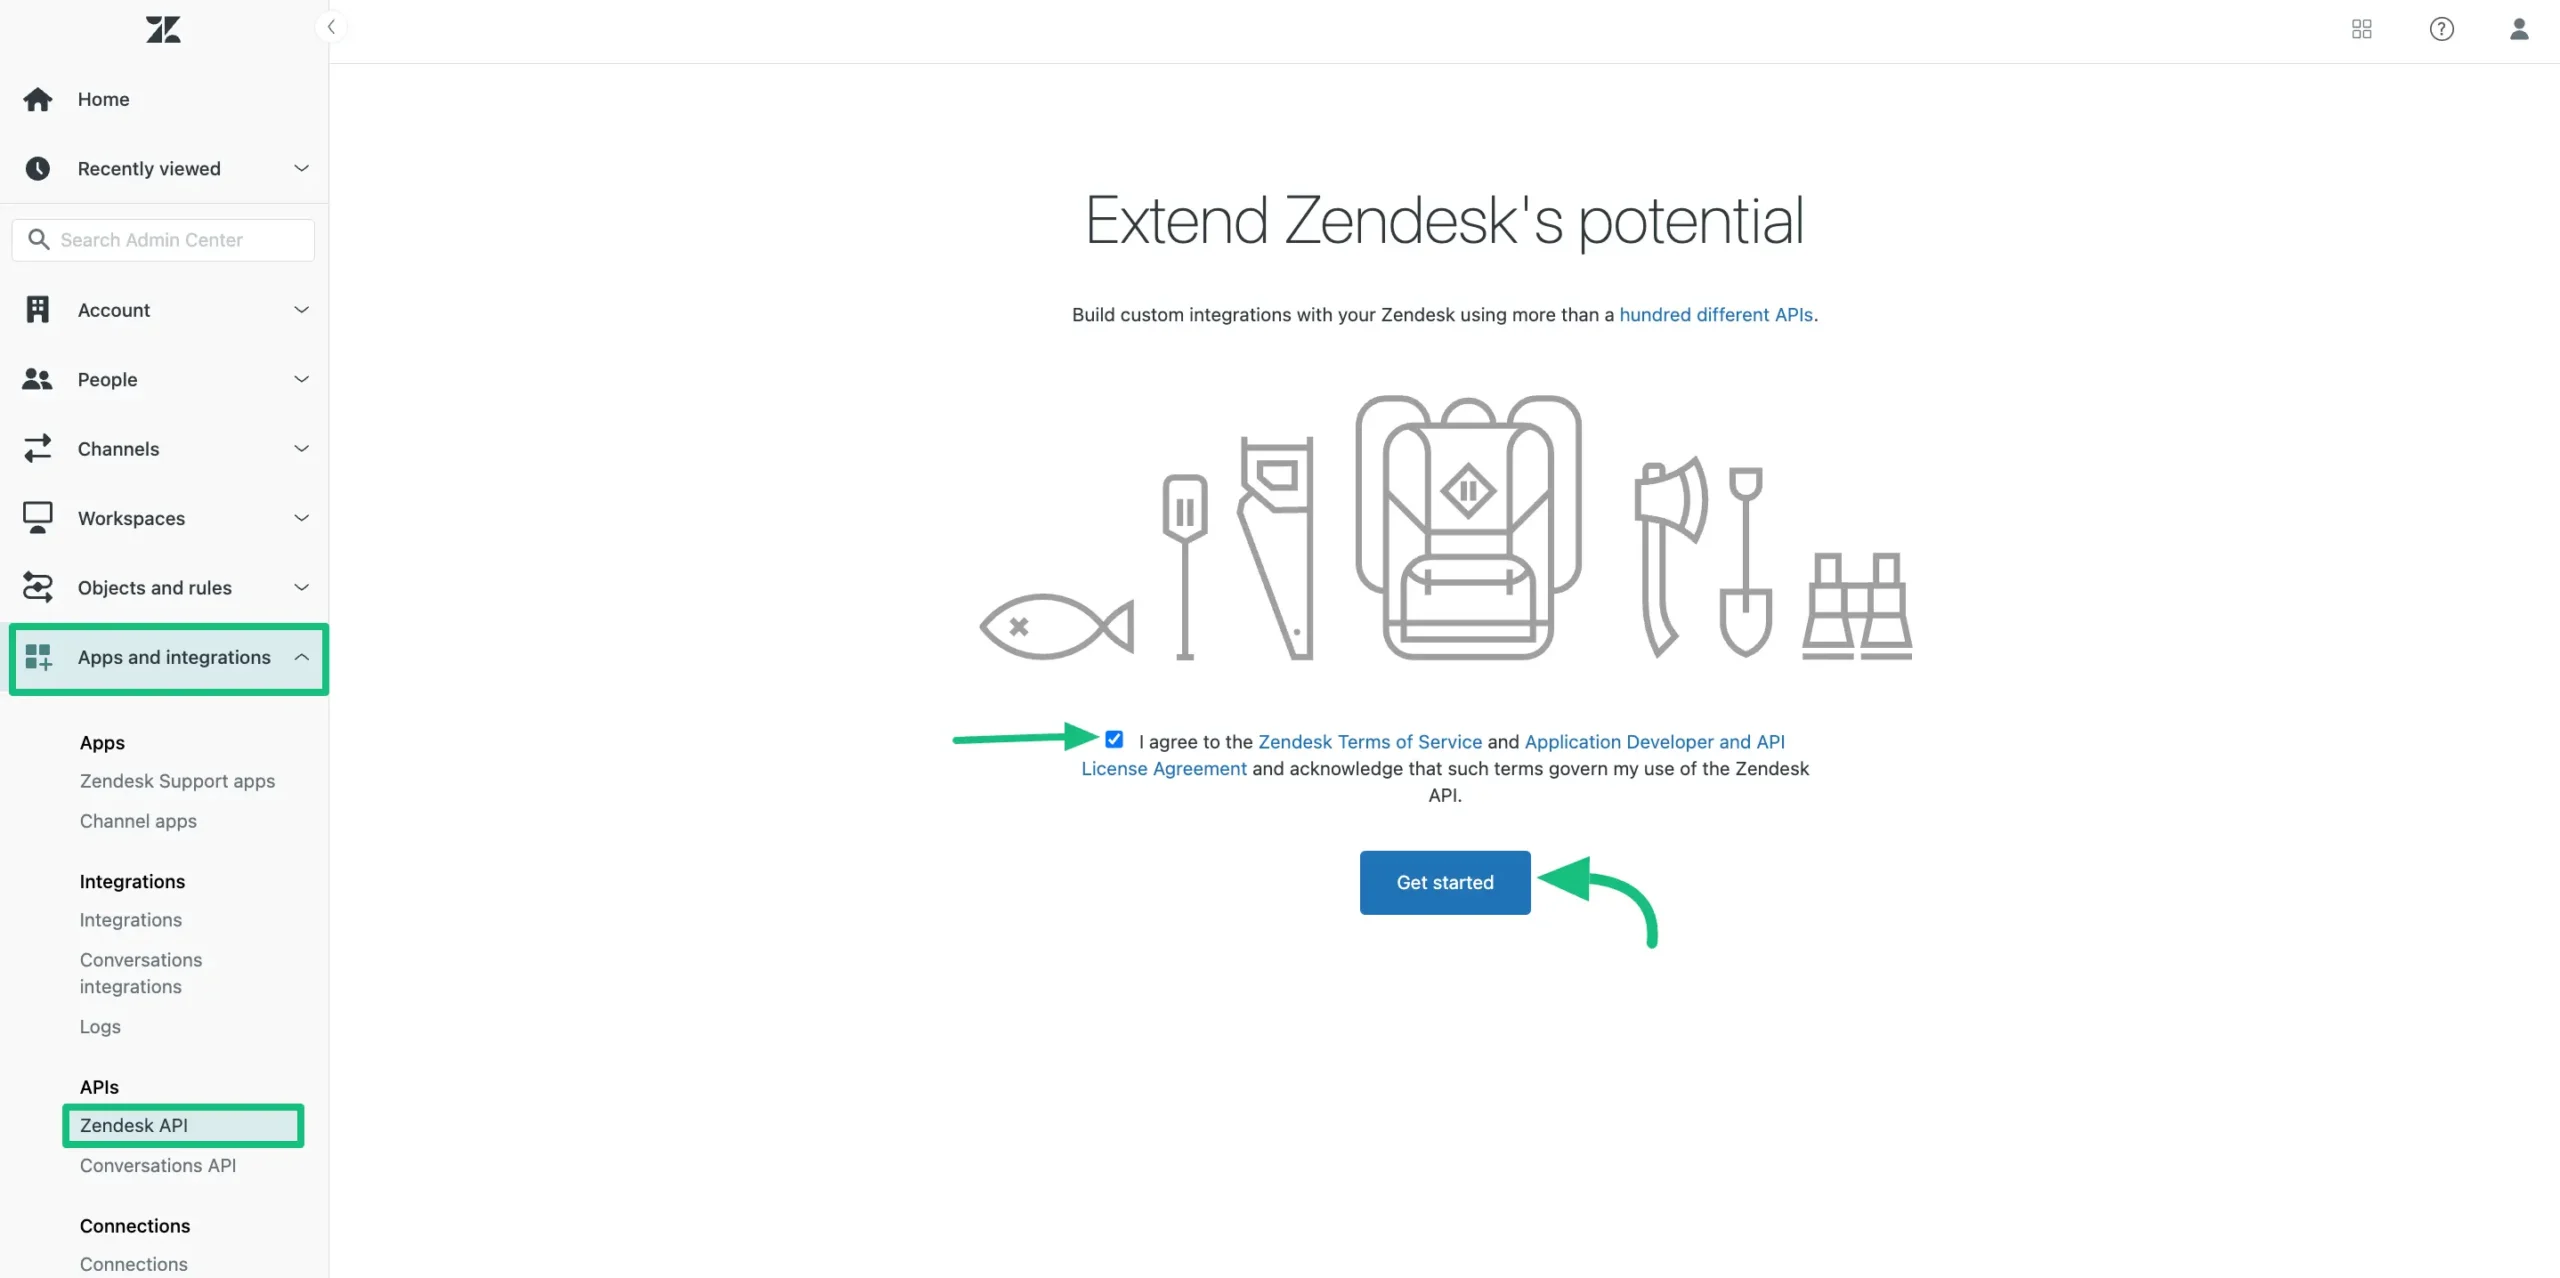 Get started to get the Zendesk API